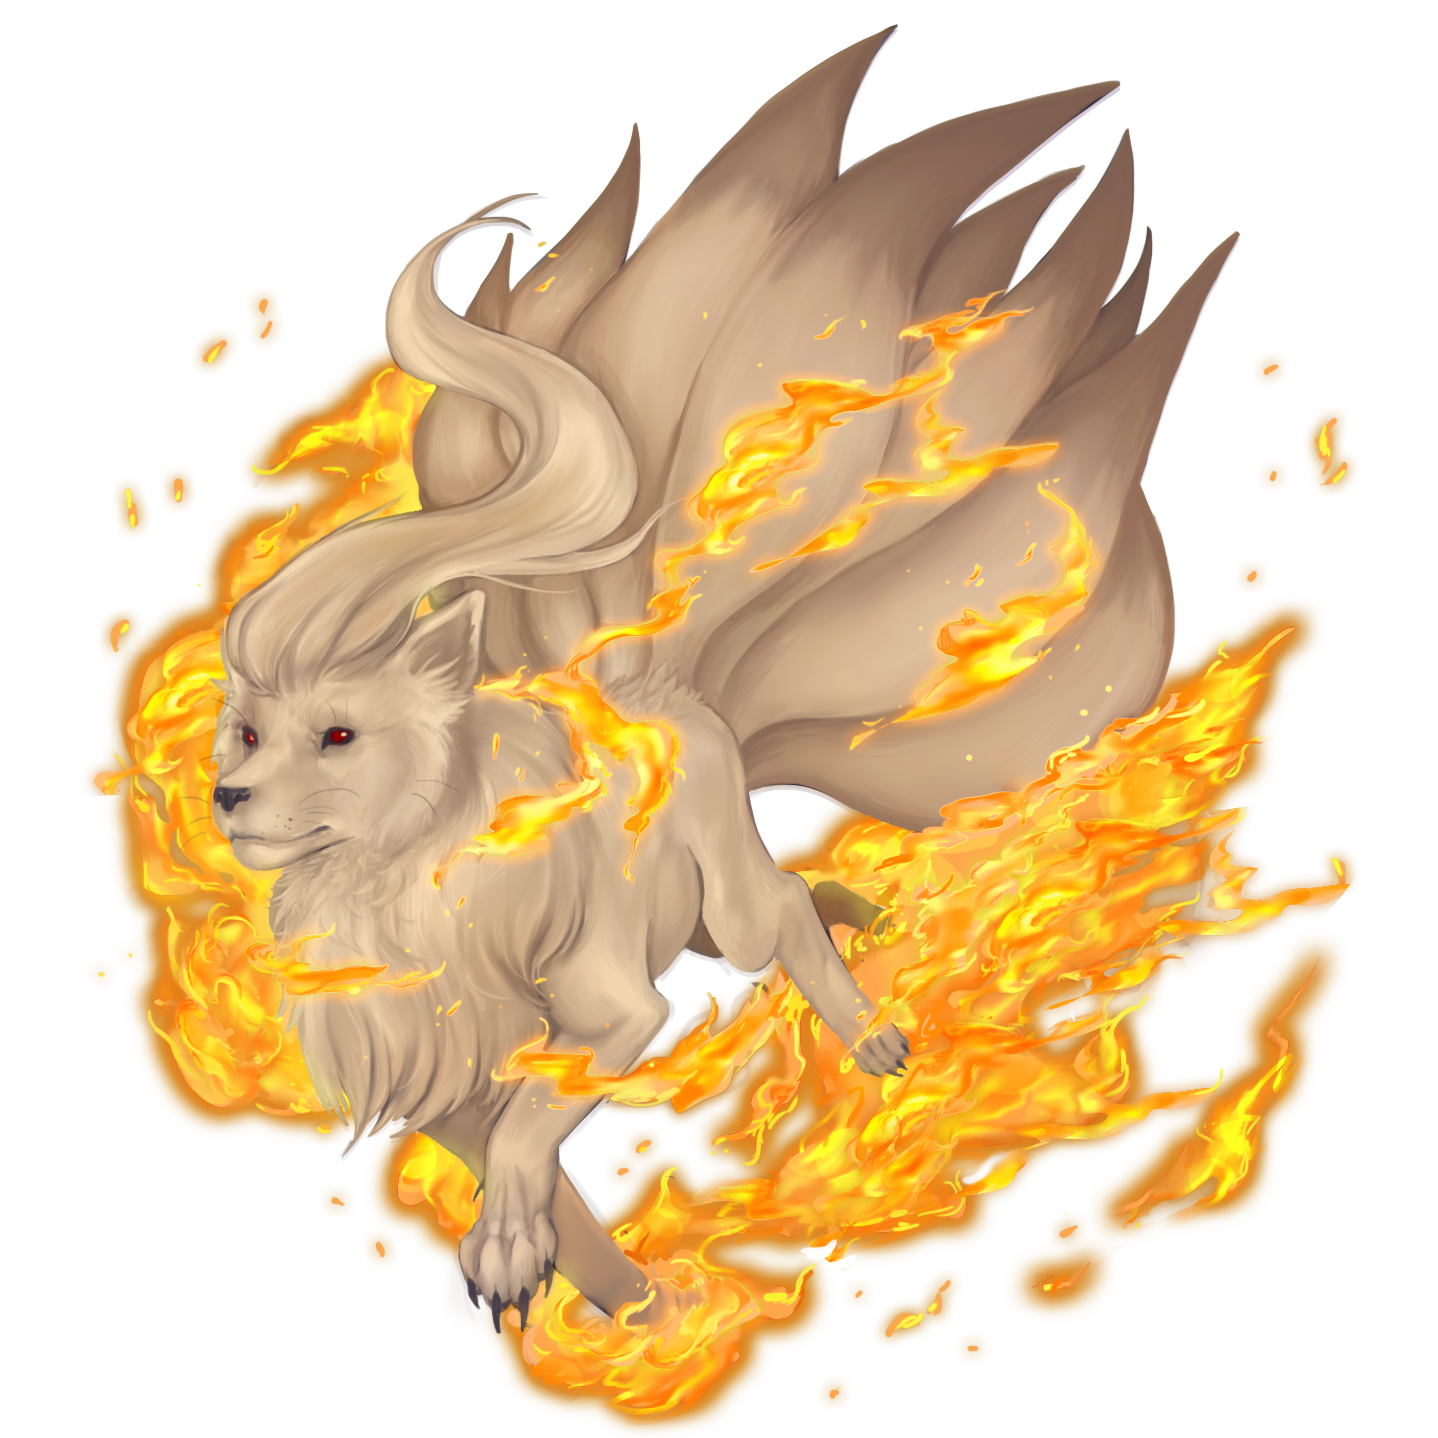 ninetales-used-fire-blitz-game-art-hq-pokemon-art-tribute-by_lilith_the_5th